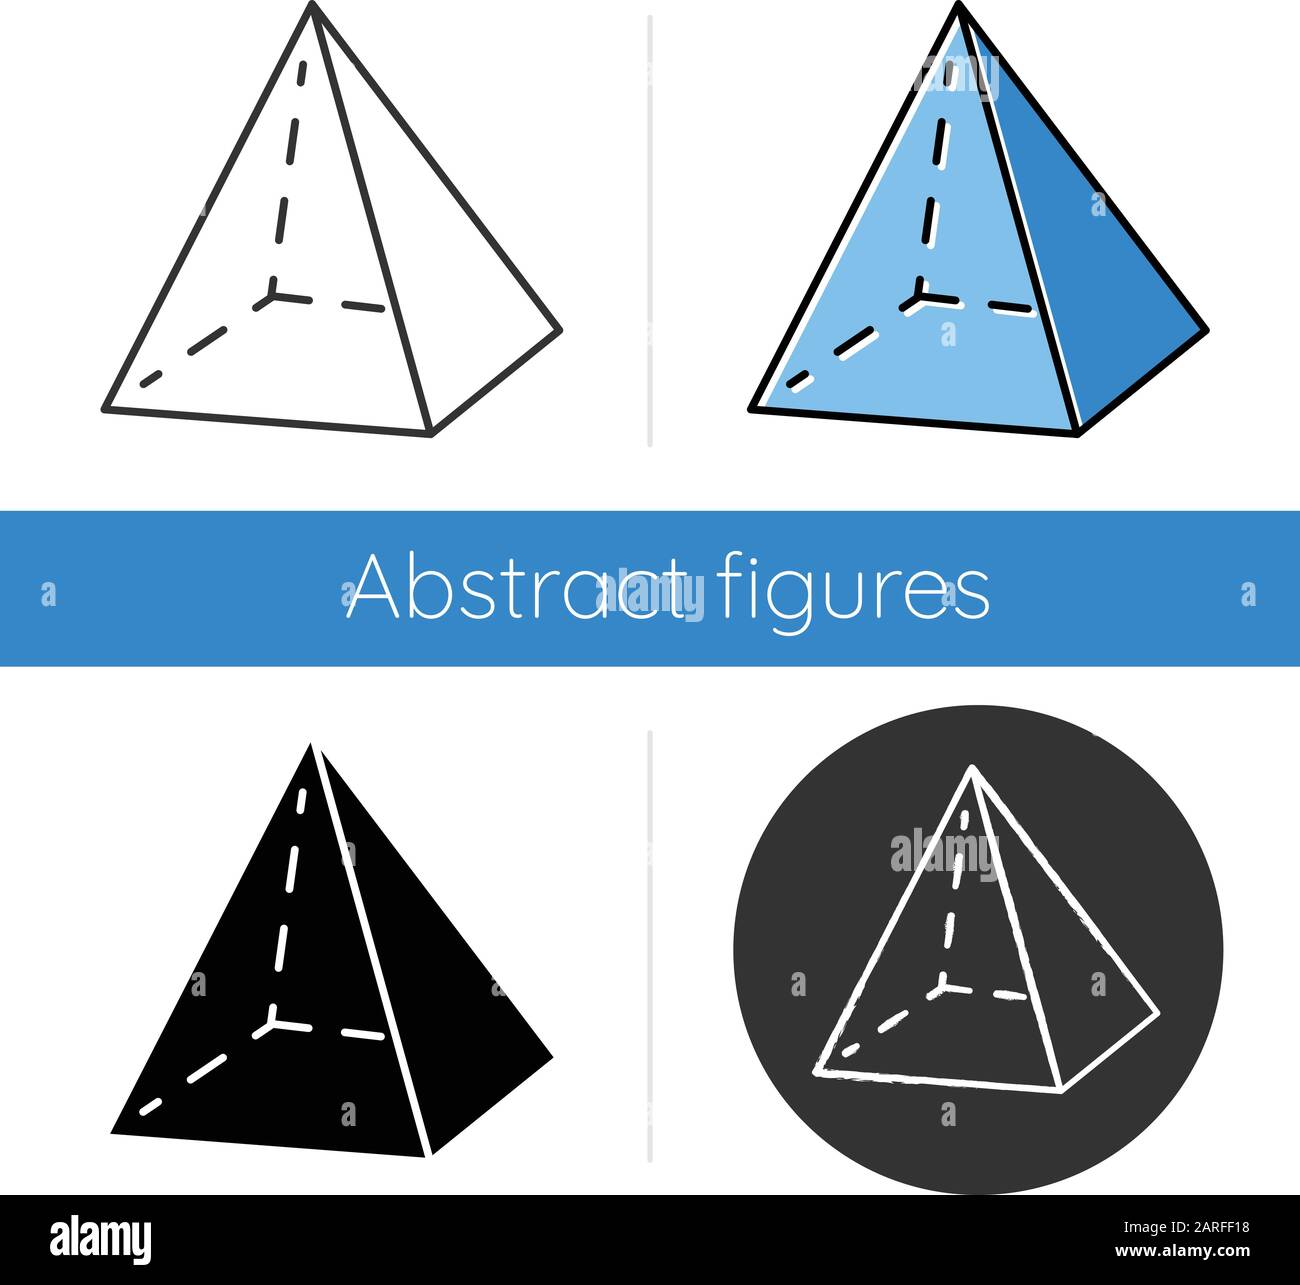 Pyramid icon. Transparent geometric figure. Decorative element. Abstract shape. Isometric form with triangular sides. Flat design, linear and color st Stock Vector